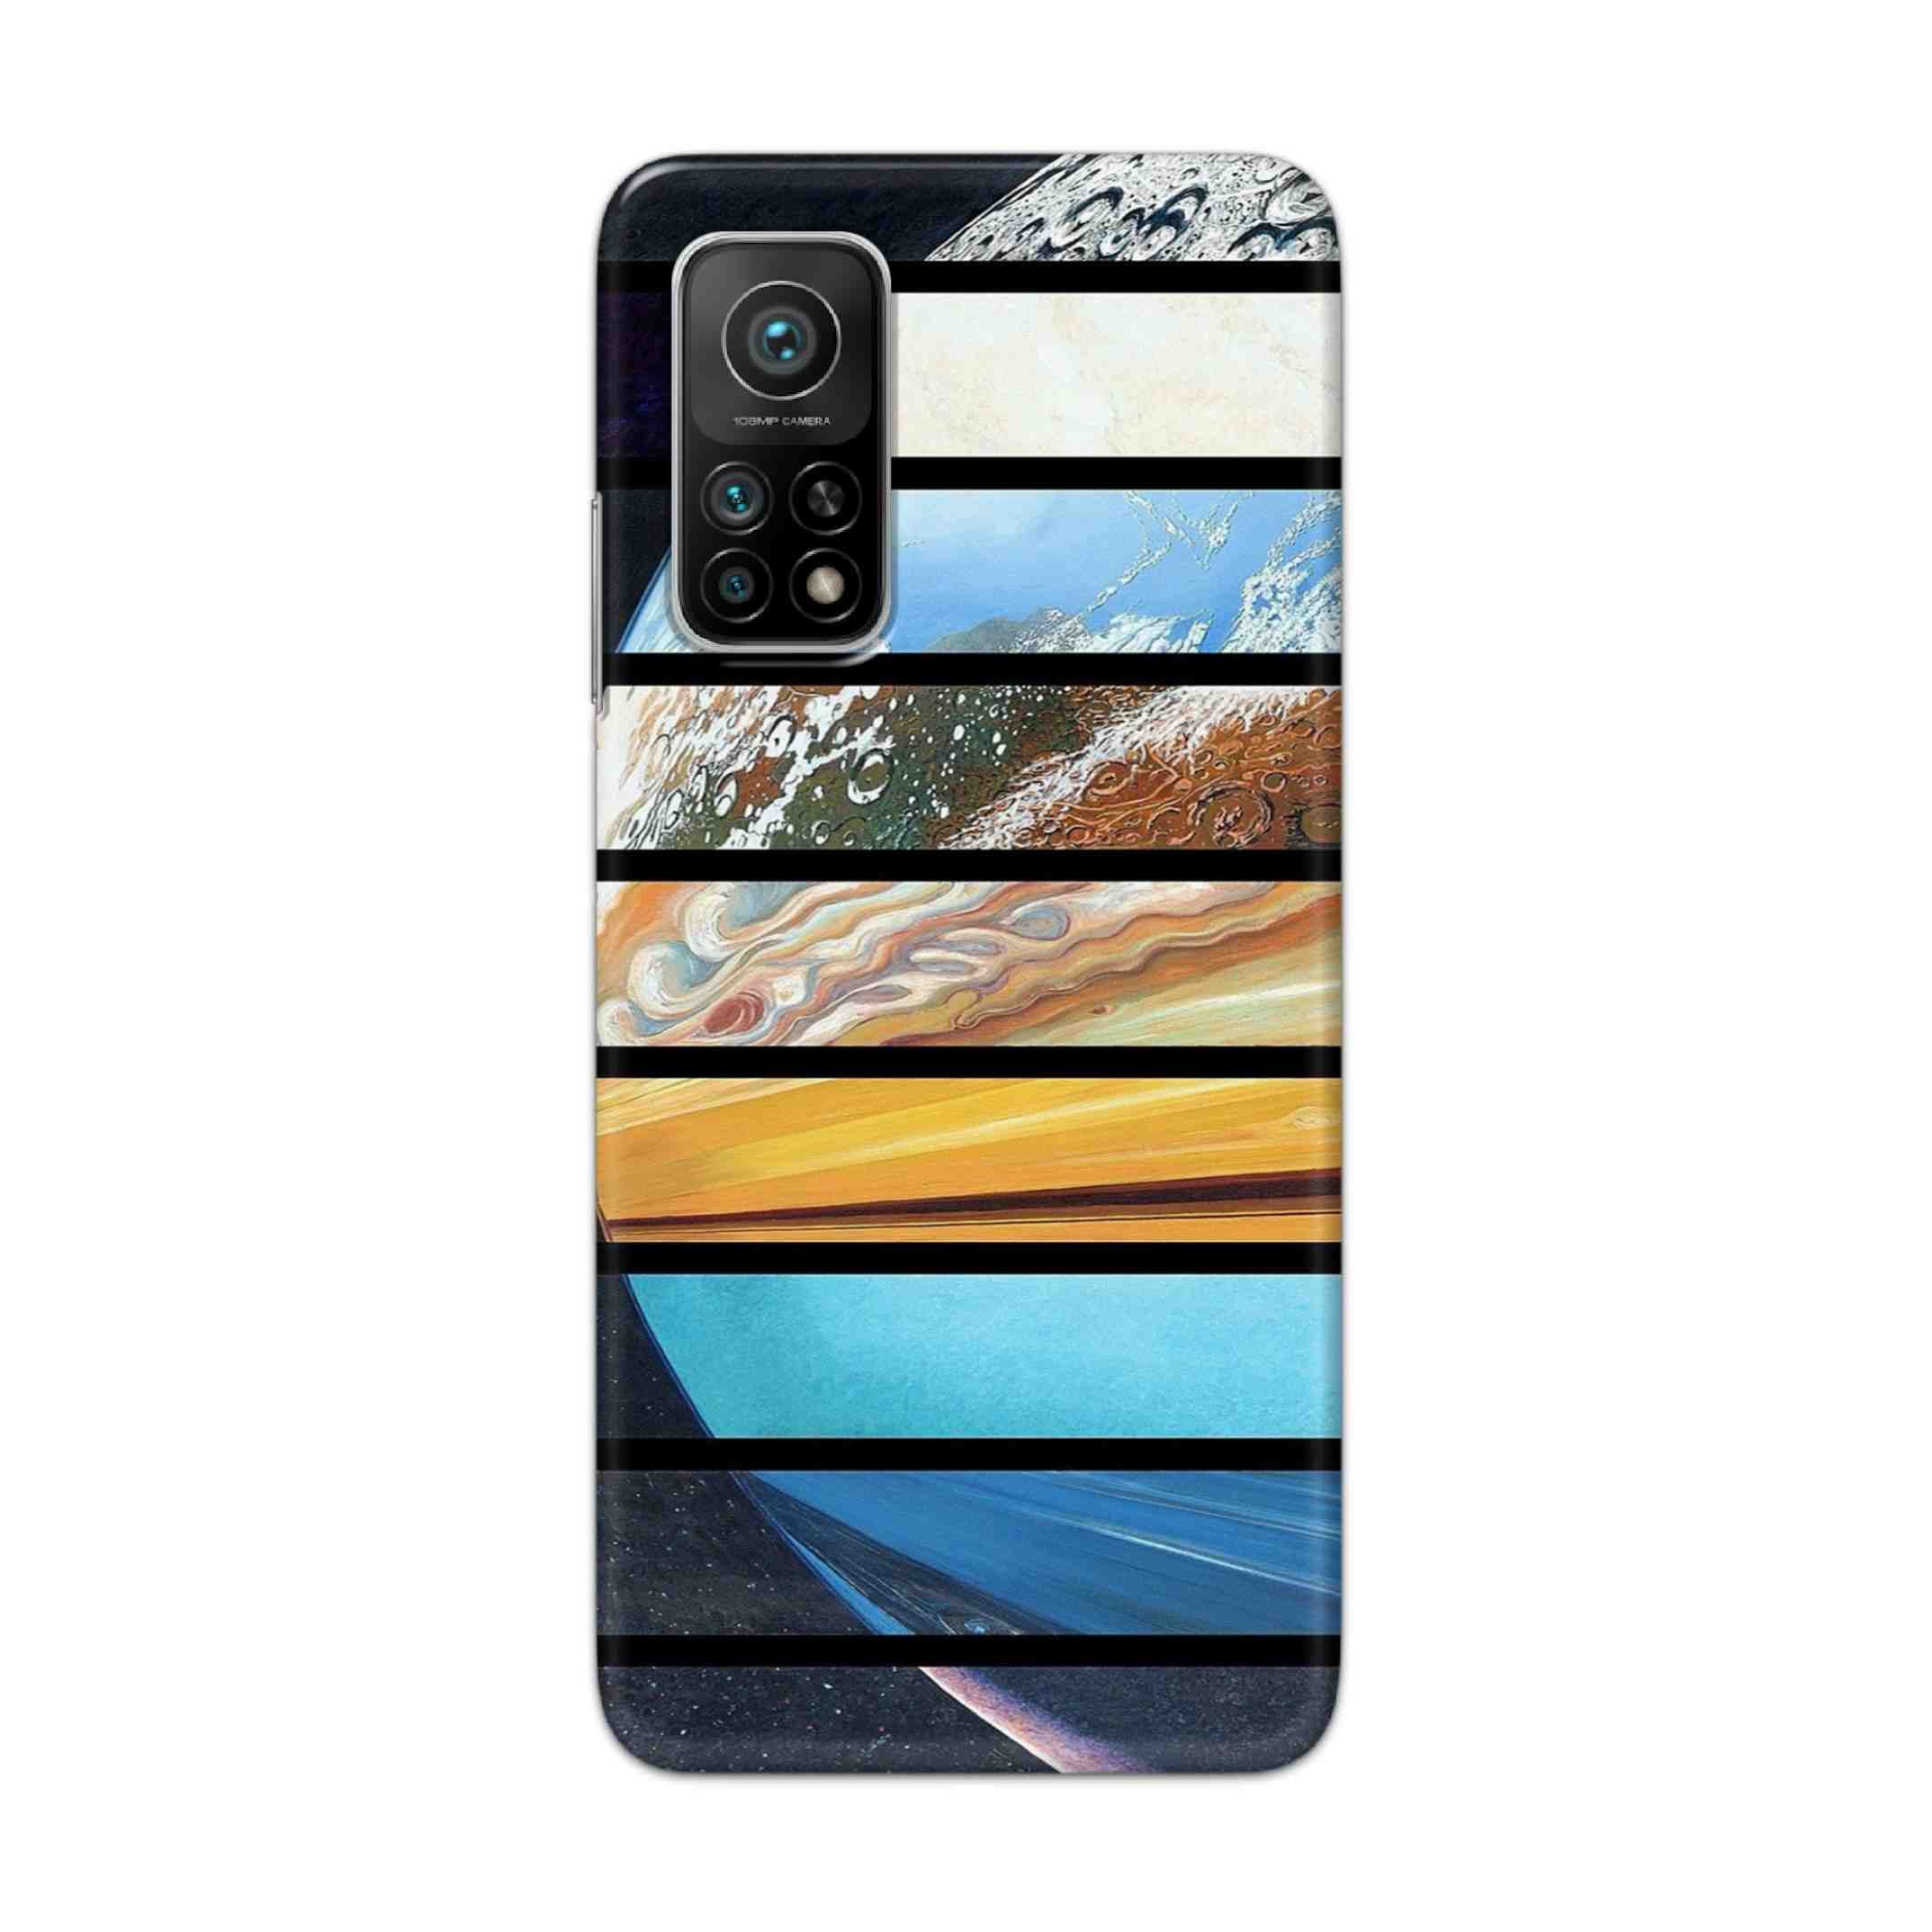 Buy Colourful Earth Hard Back Mobile Phone Case Cover For Xiaomi Mi 10T 5G Online